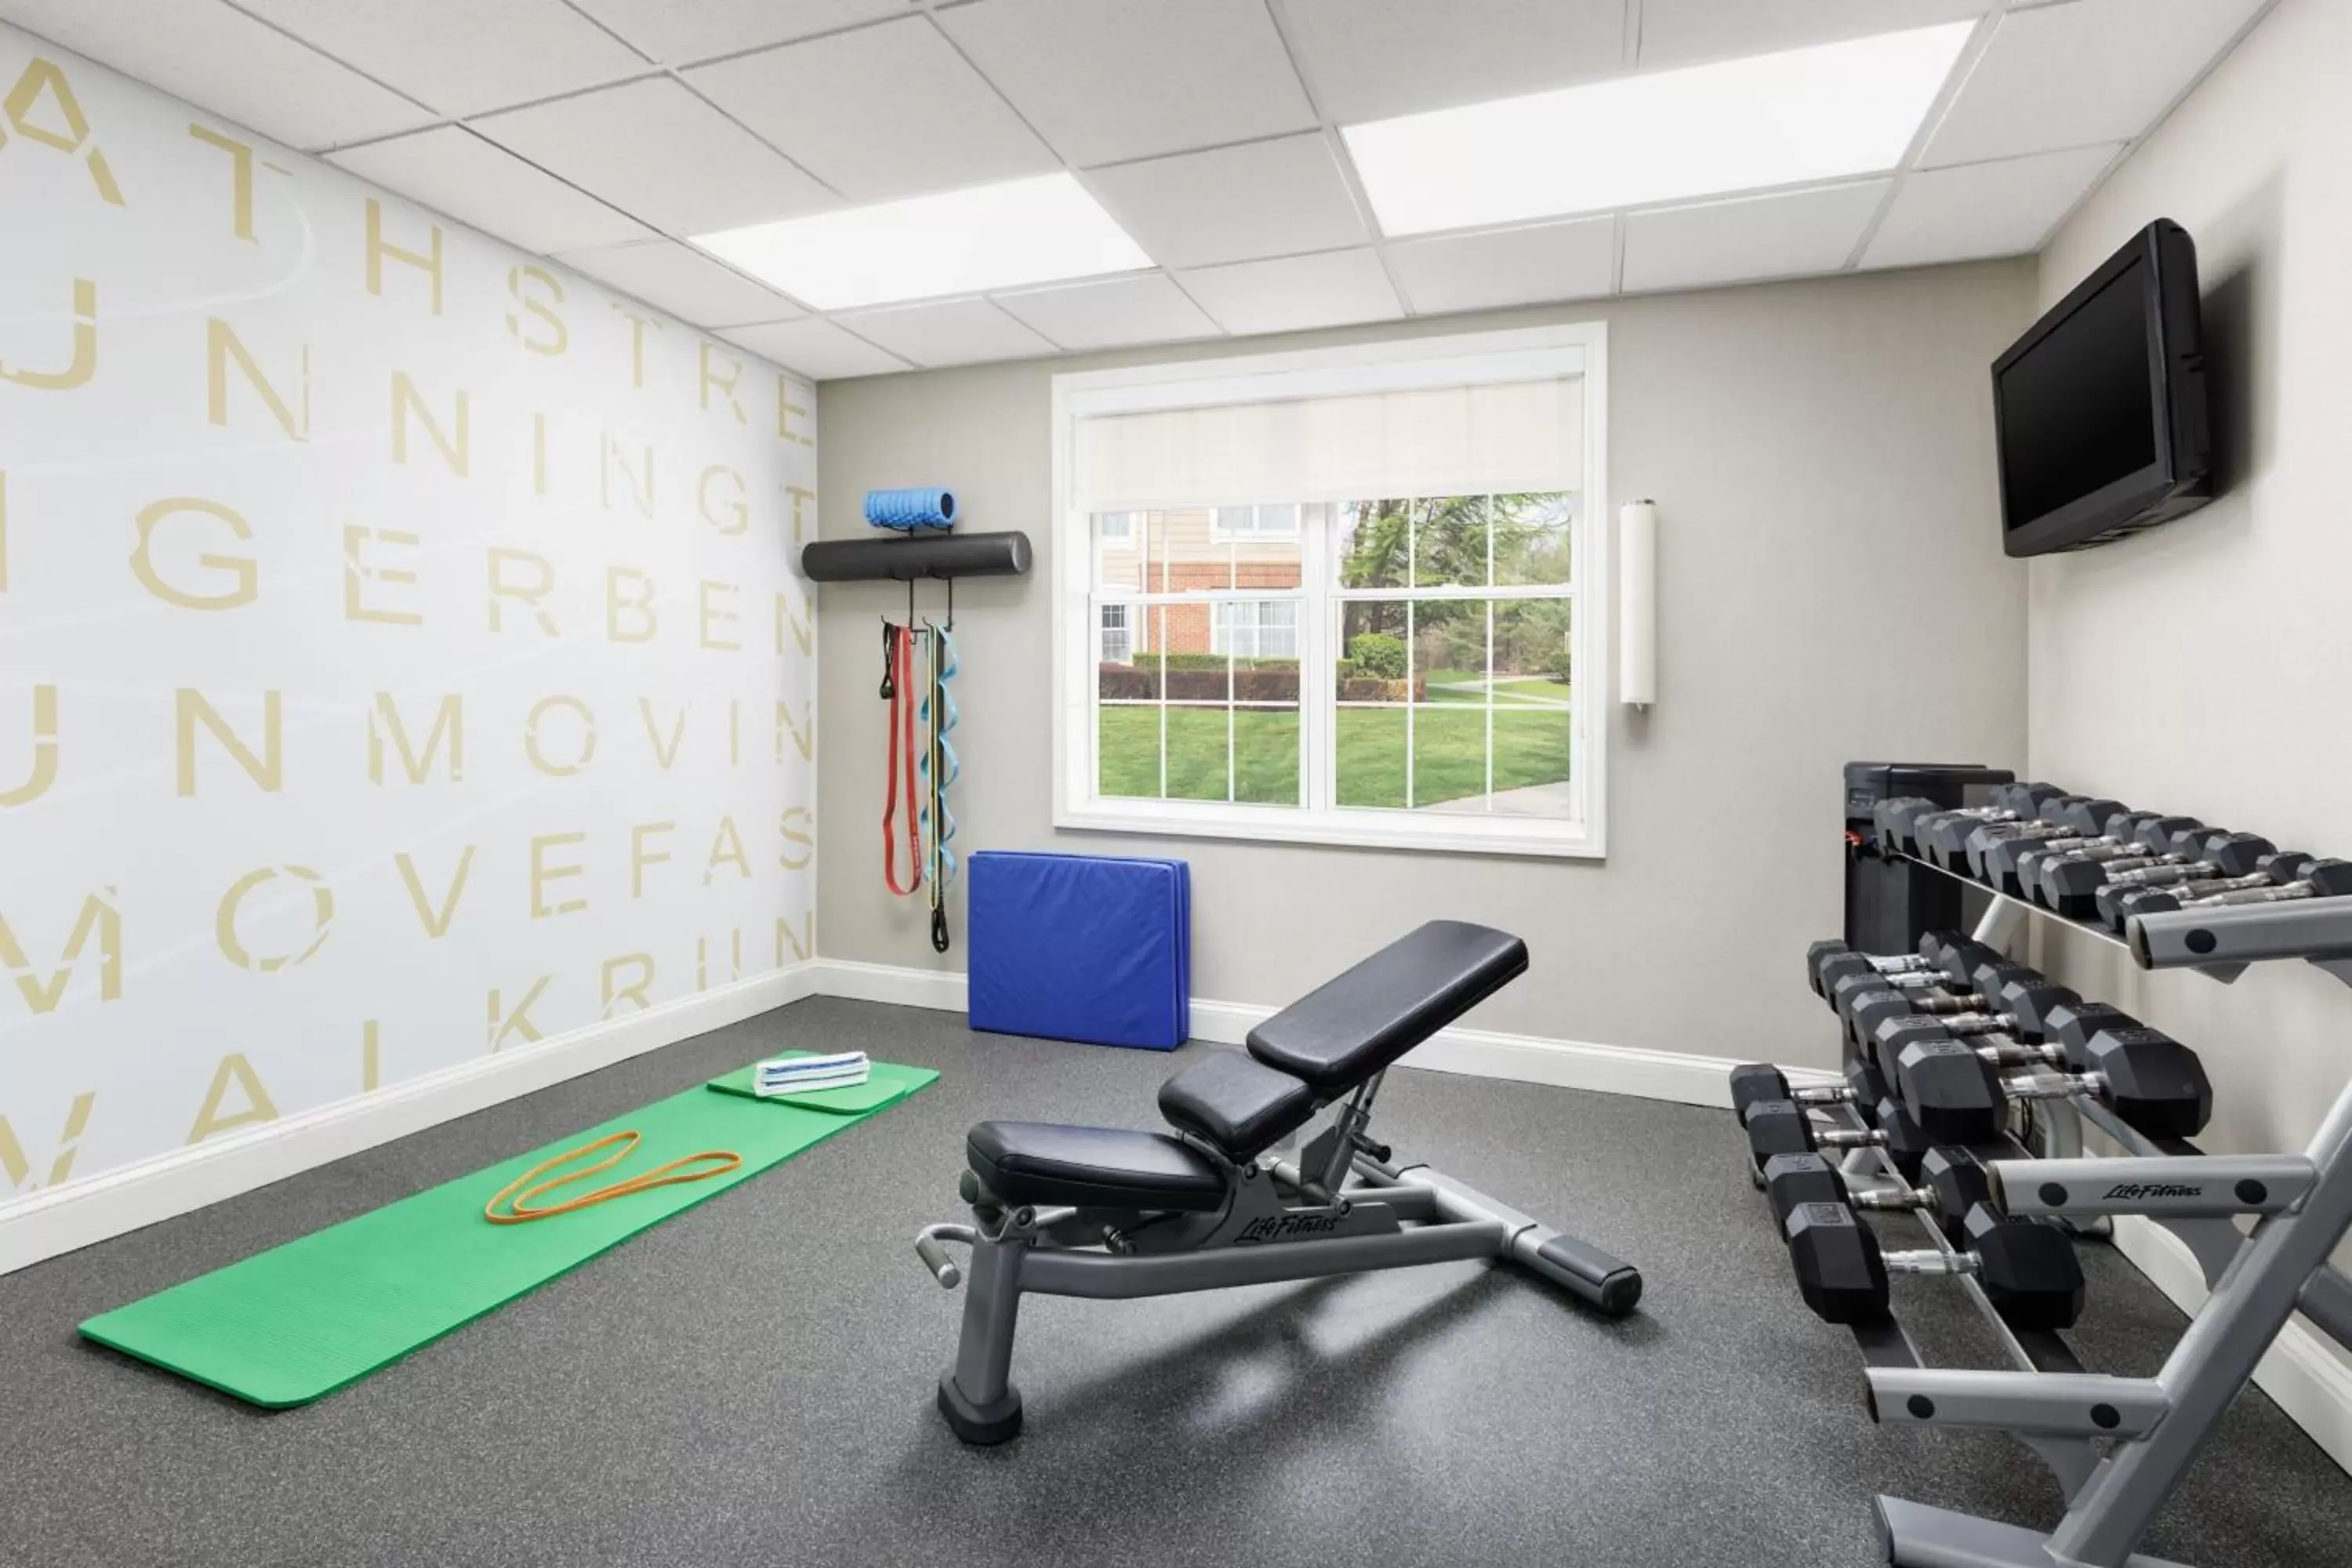 Fitness centre/facilities, Fitness Center/Facilities in Residence Inn Saddle River